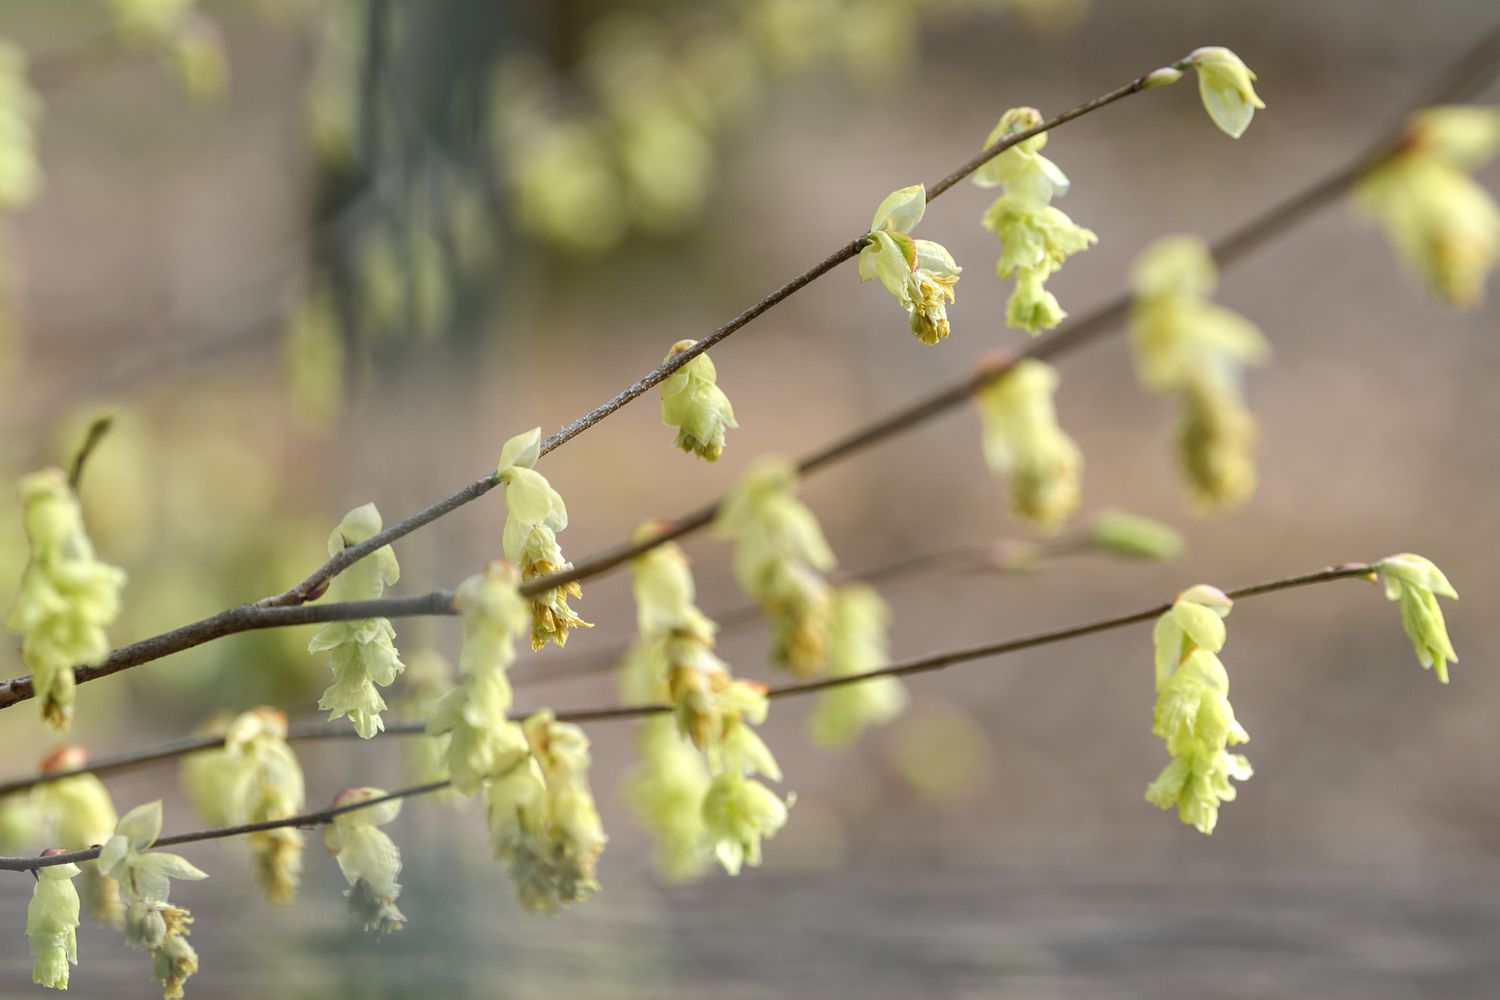 Buttercup winter hazel thin branches with small yellow flowers closeup